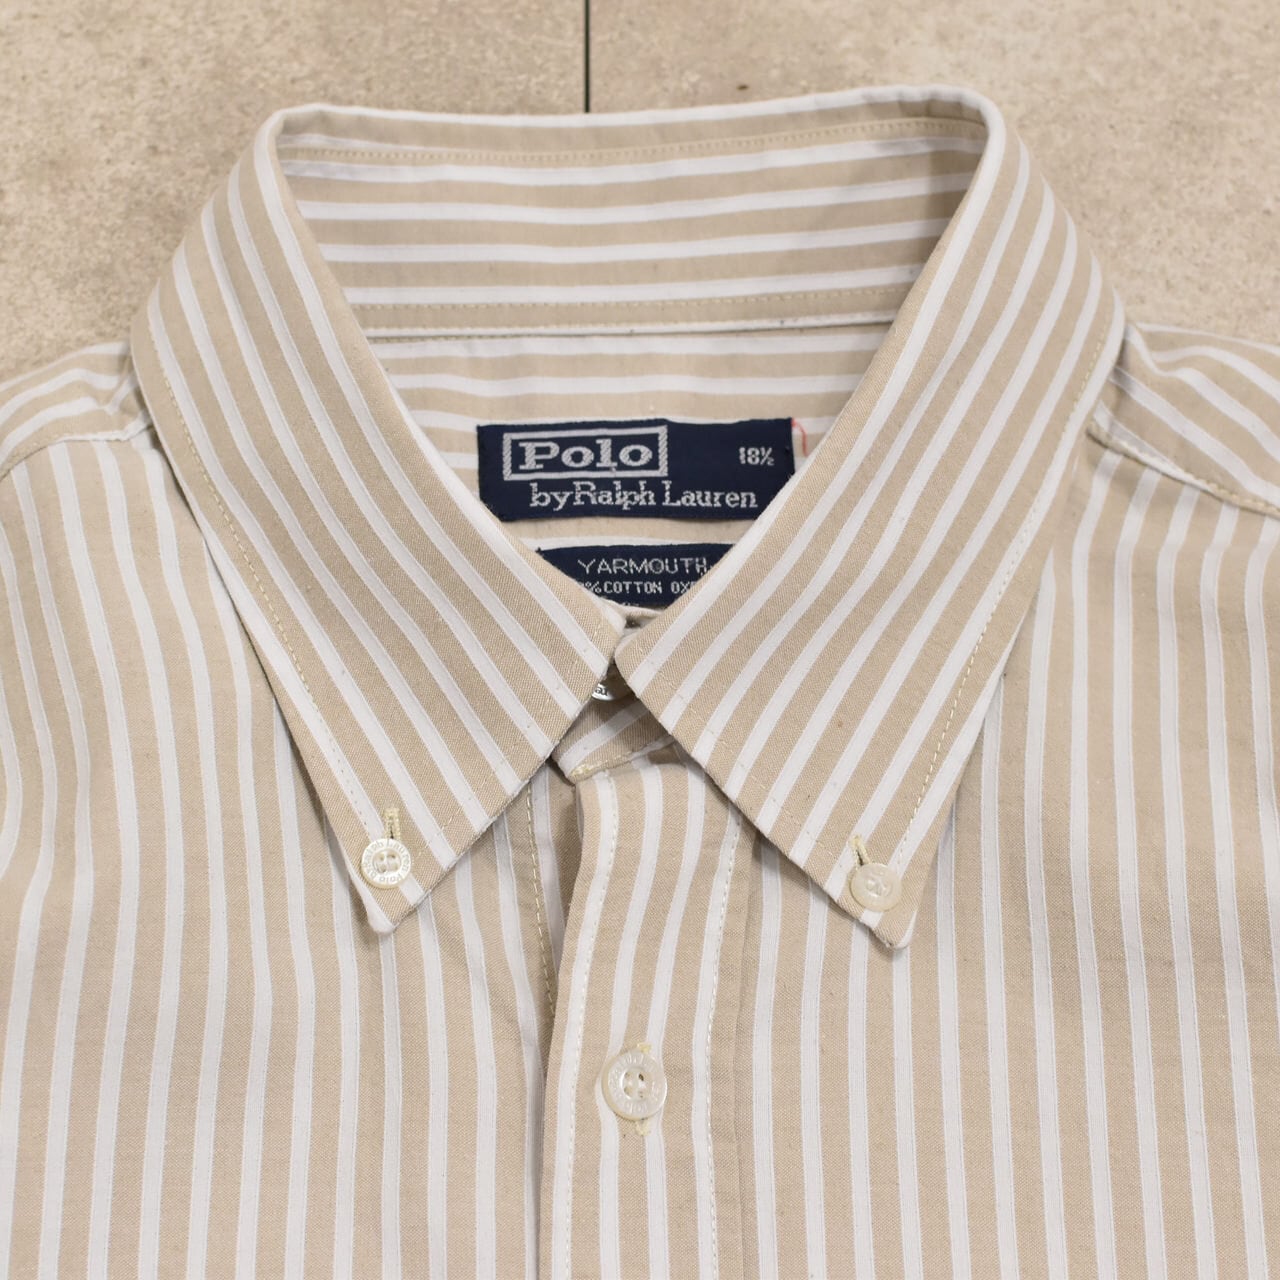 90s POLO by Ralph Lauren YARMOUTH shirt | 古着屋 grin days memory ...